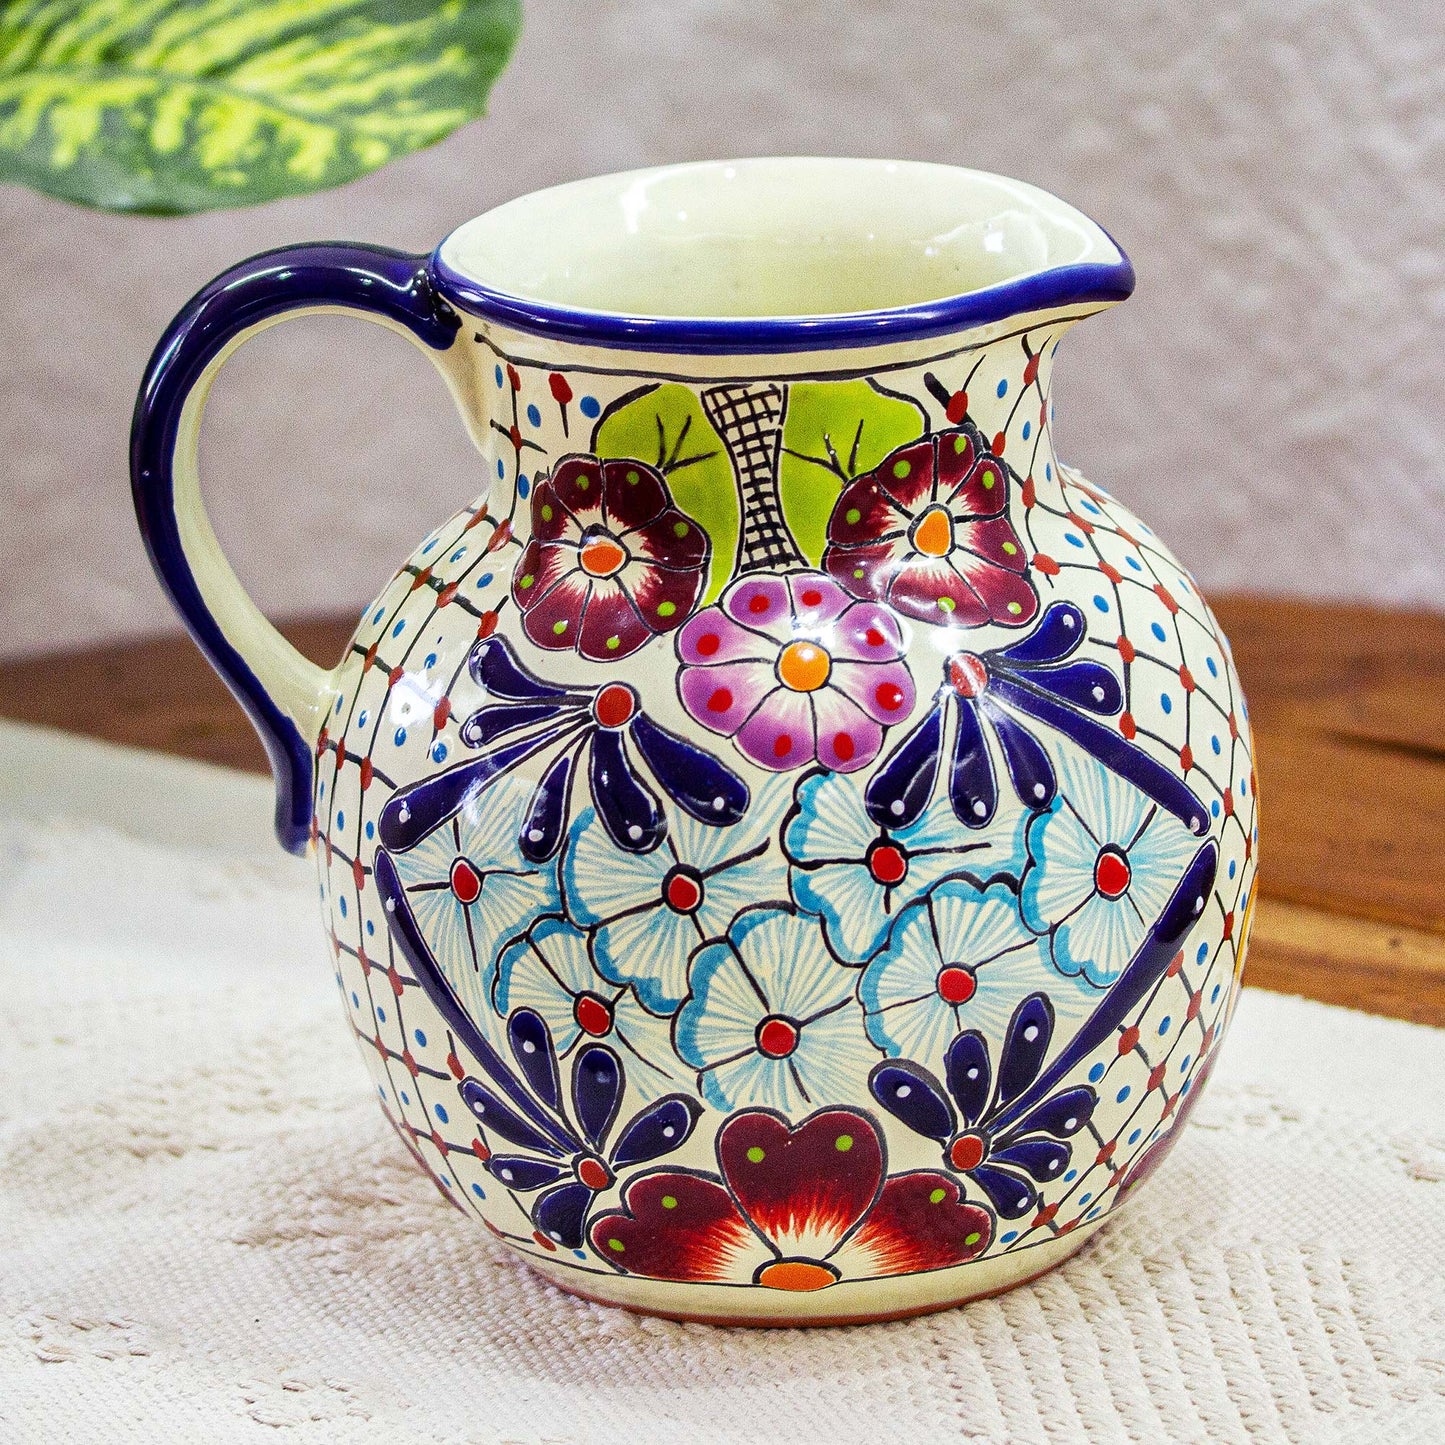 Colors of Mexico Colorful Talavera-style Ceramic Pitcher